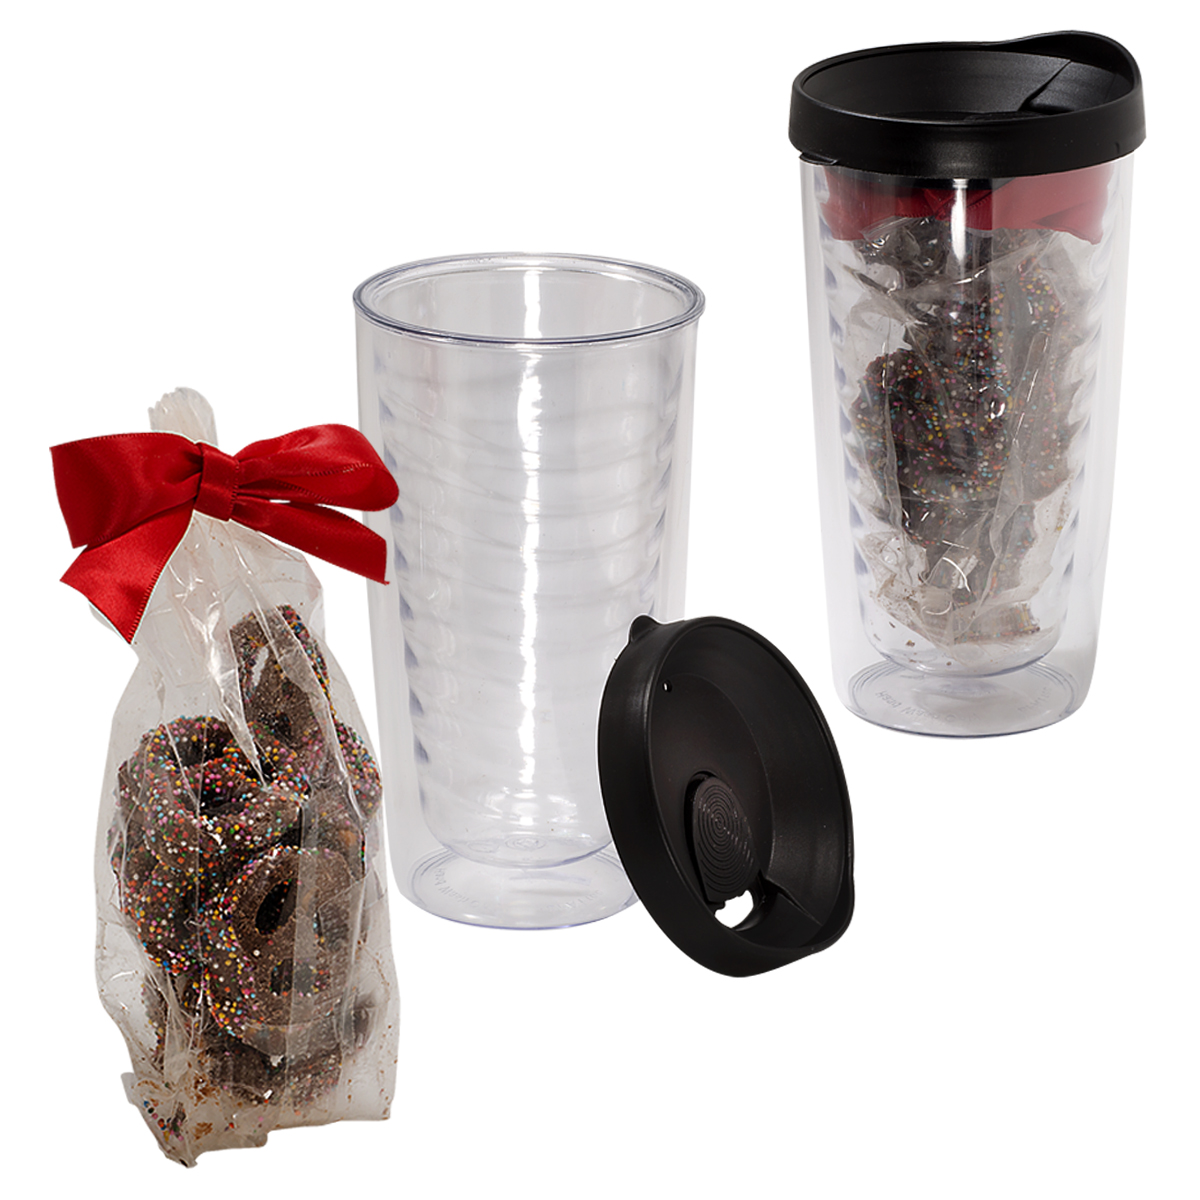 Avalon Clear Tumbler Set with Chocolate Covered Pretzels